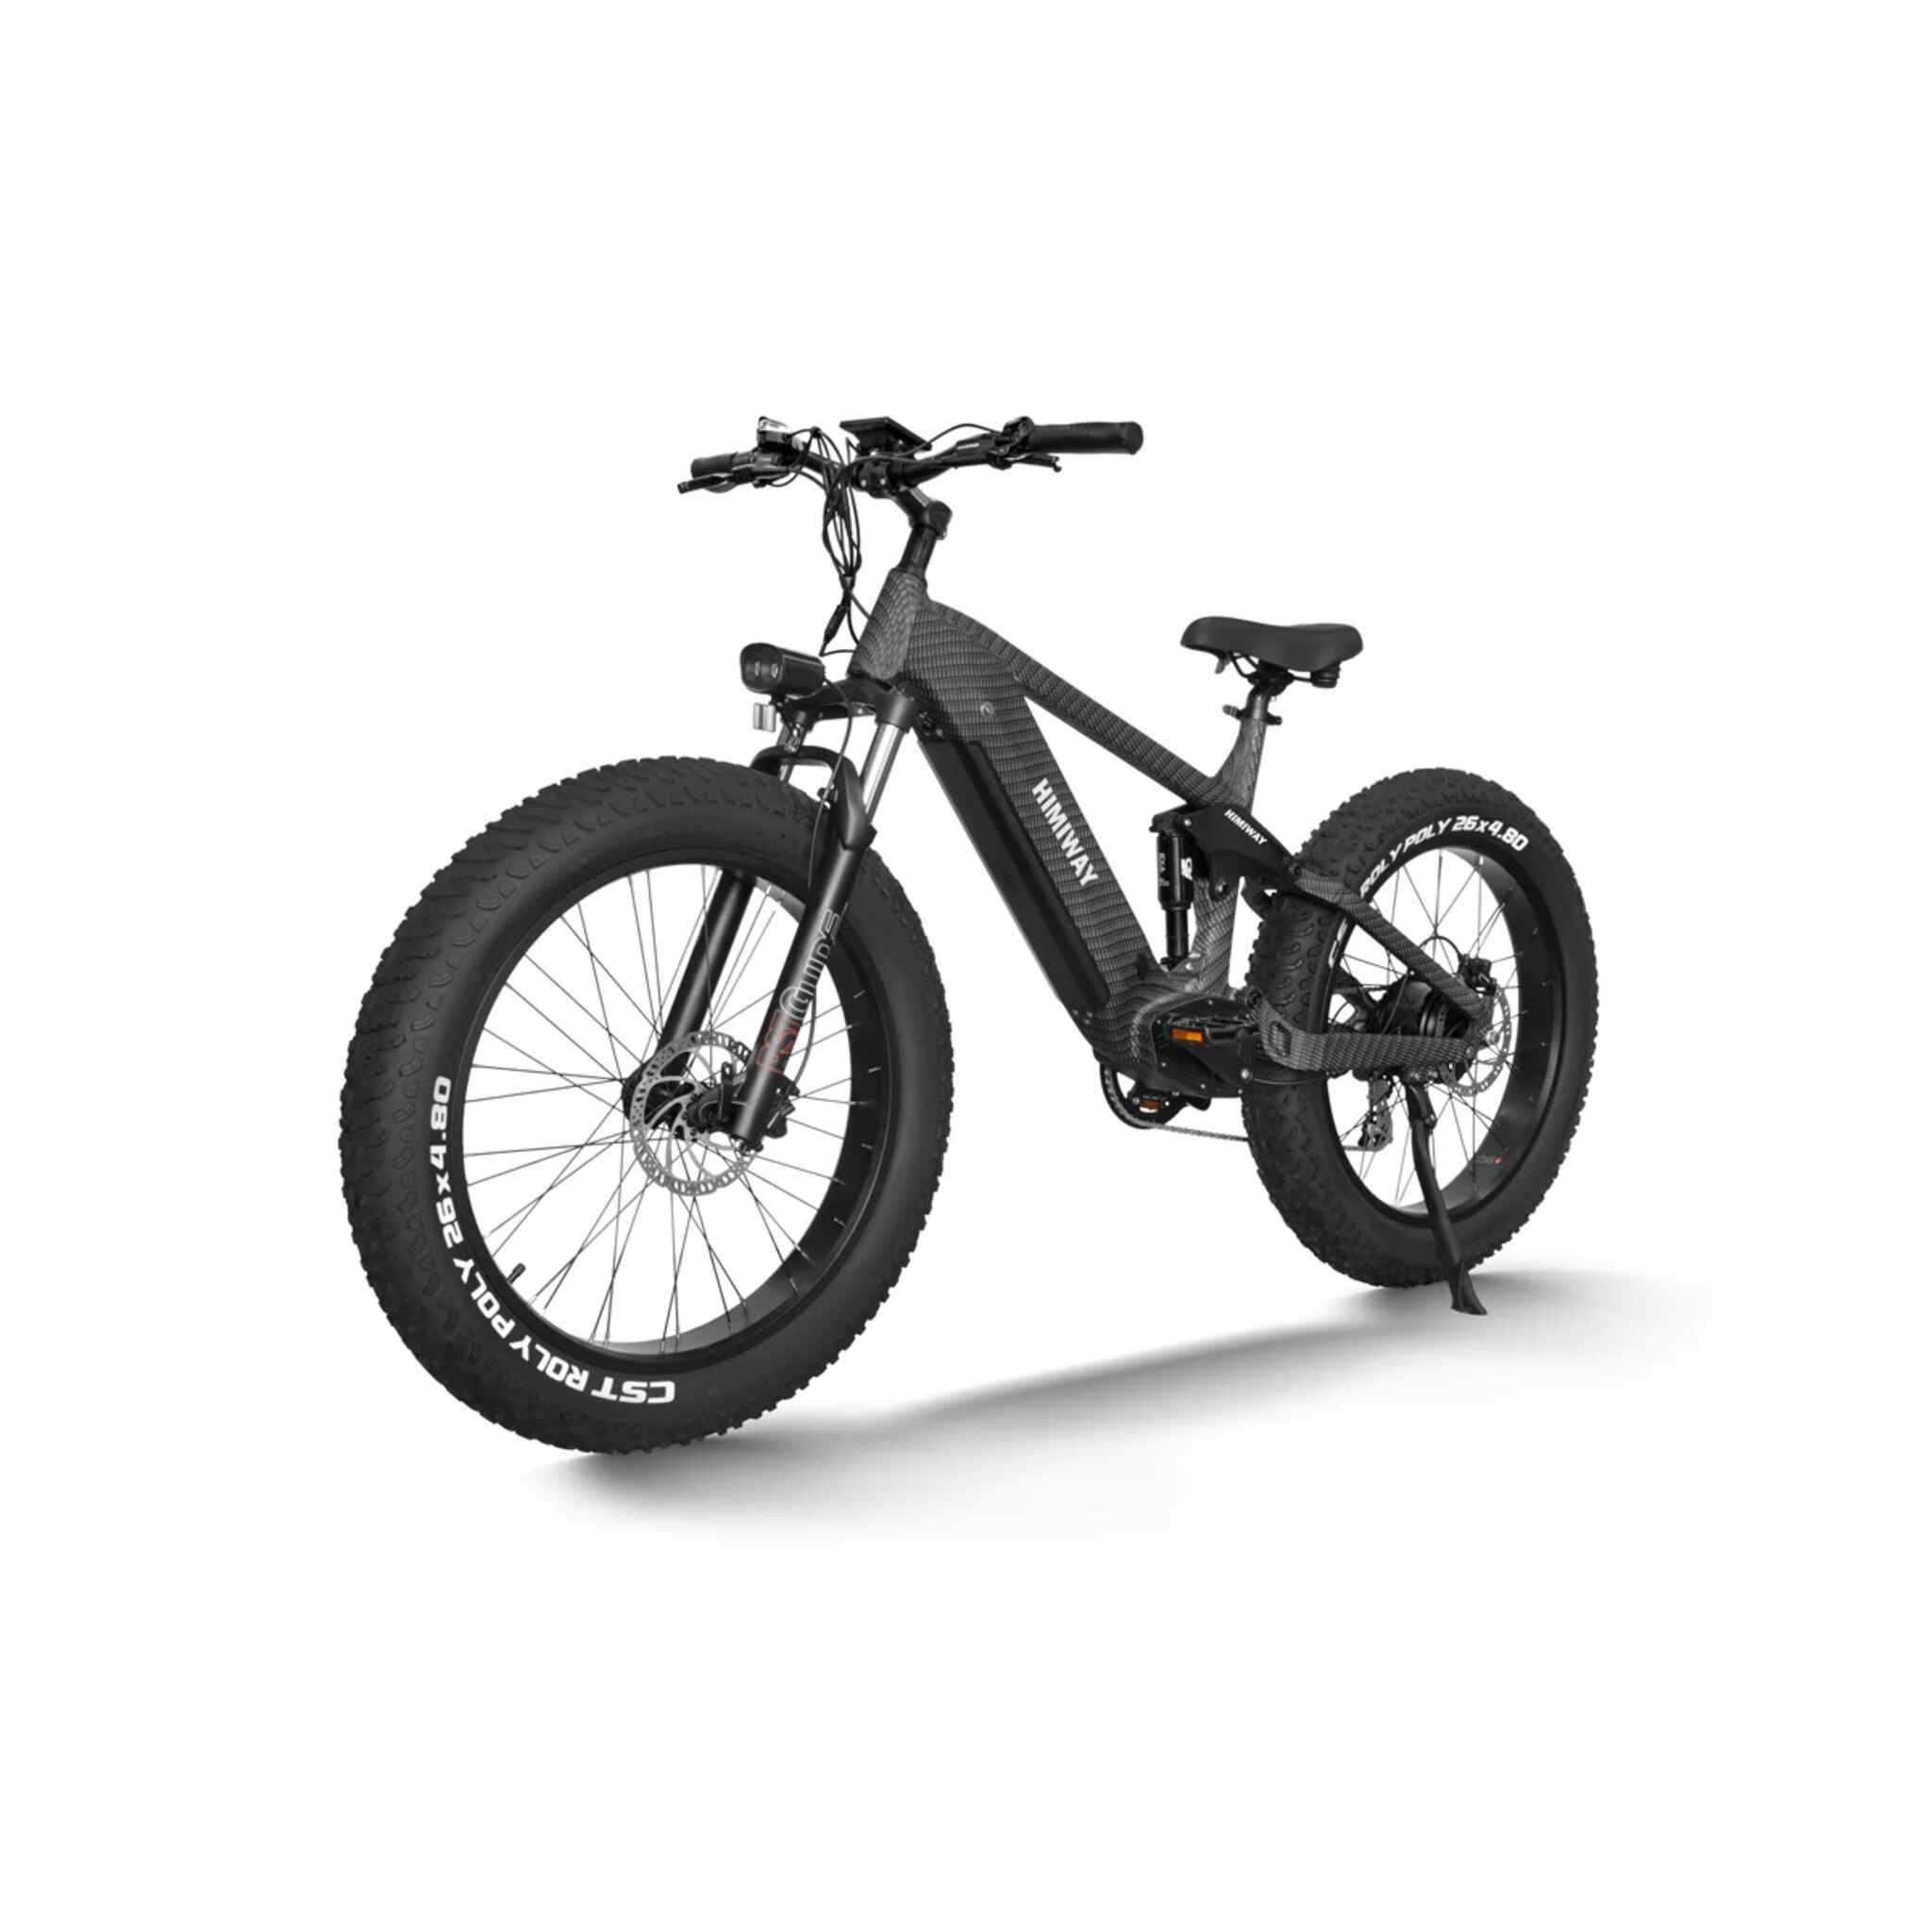 Himiway Cobra - Elektrisches Mountainbike Fully - MabeaMobility